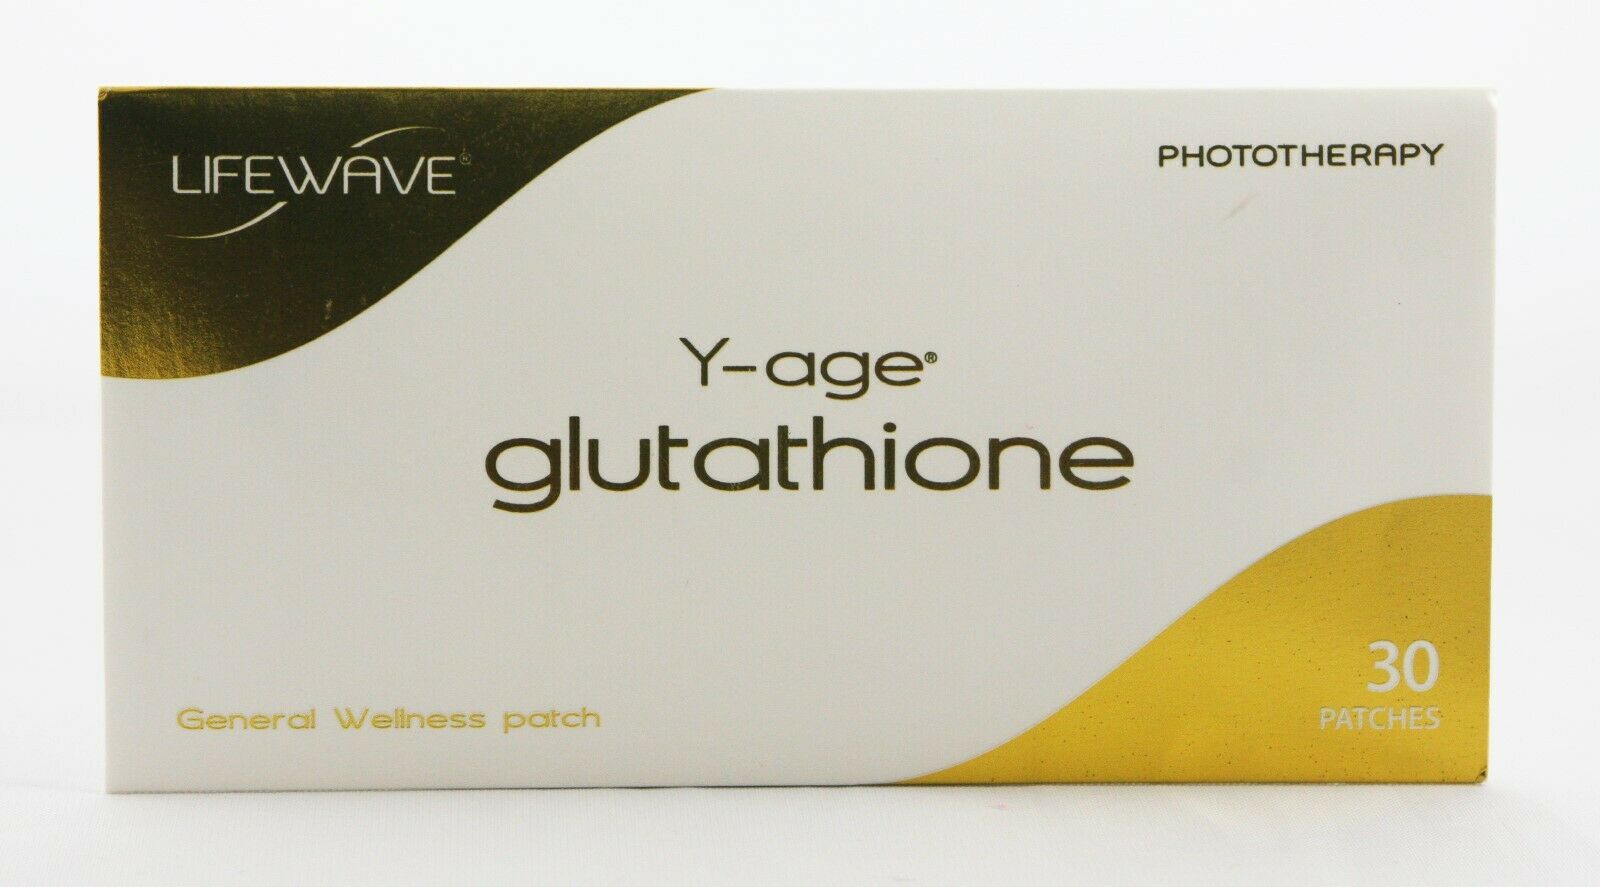 Lifewave Y-age Glutathione Phototherapy Patches, 30 Patches